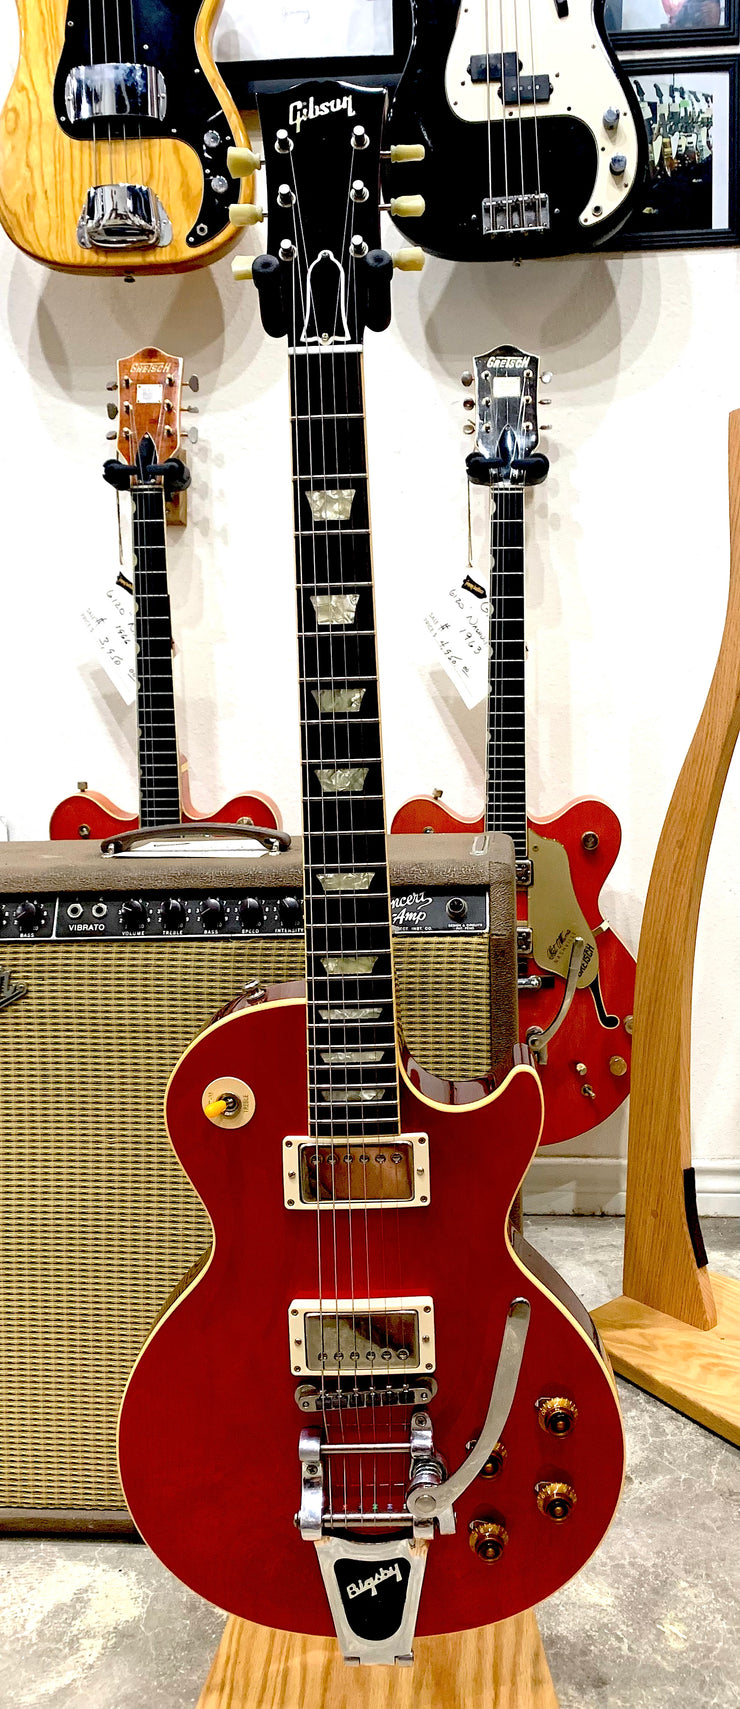 1997 Gibson Custom Shop R8 Les Paul - "Sweet Cherry" with Bigsby